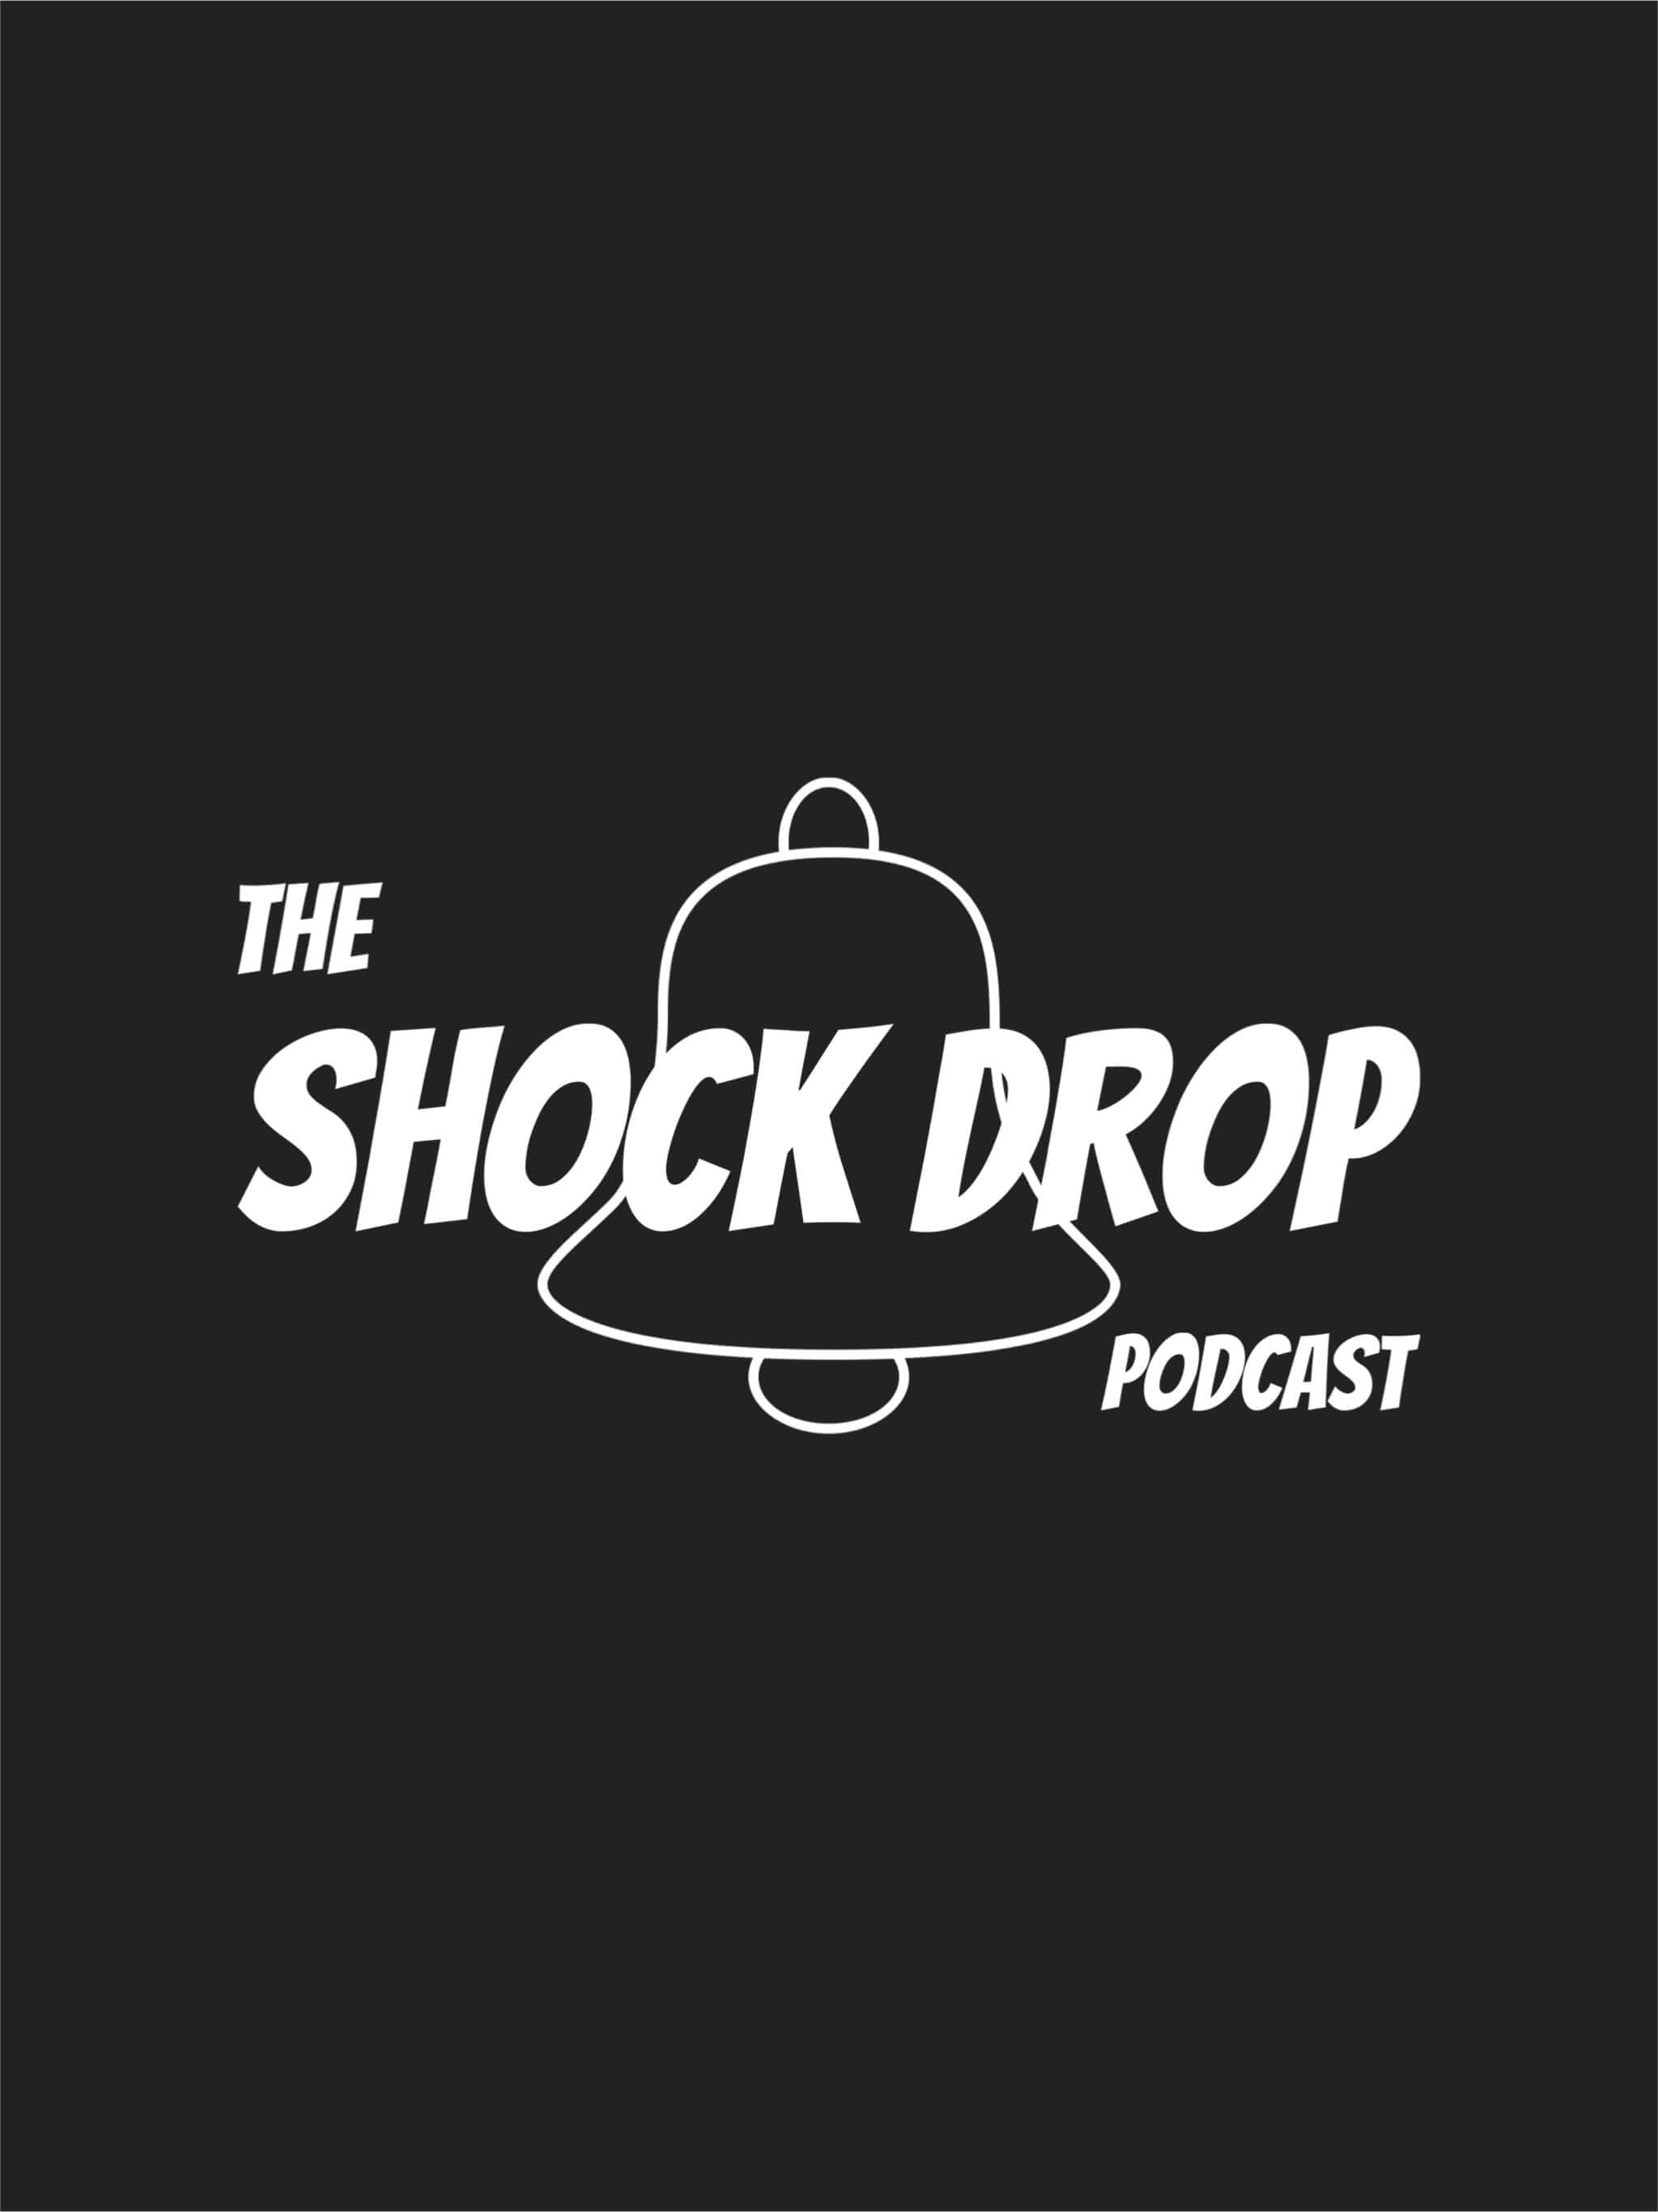 The Shock Drop Podcast